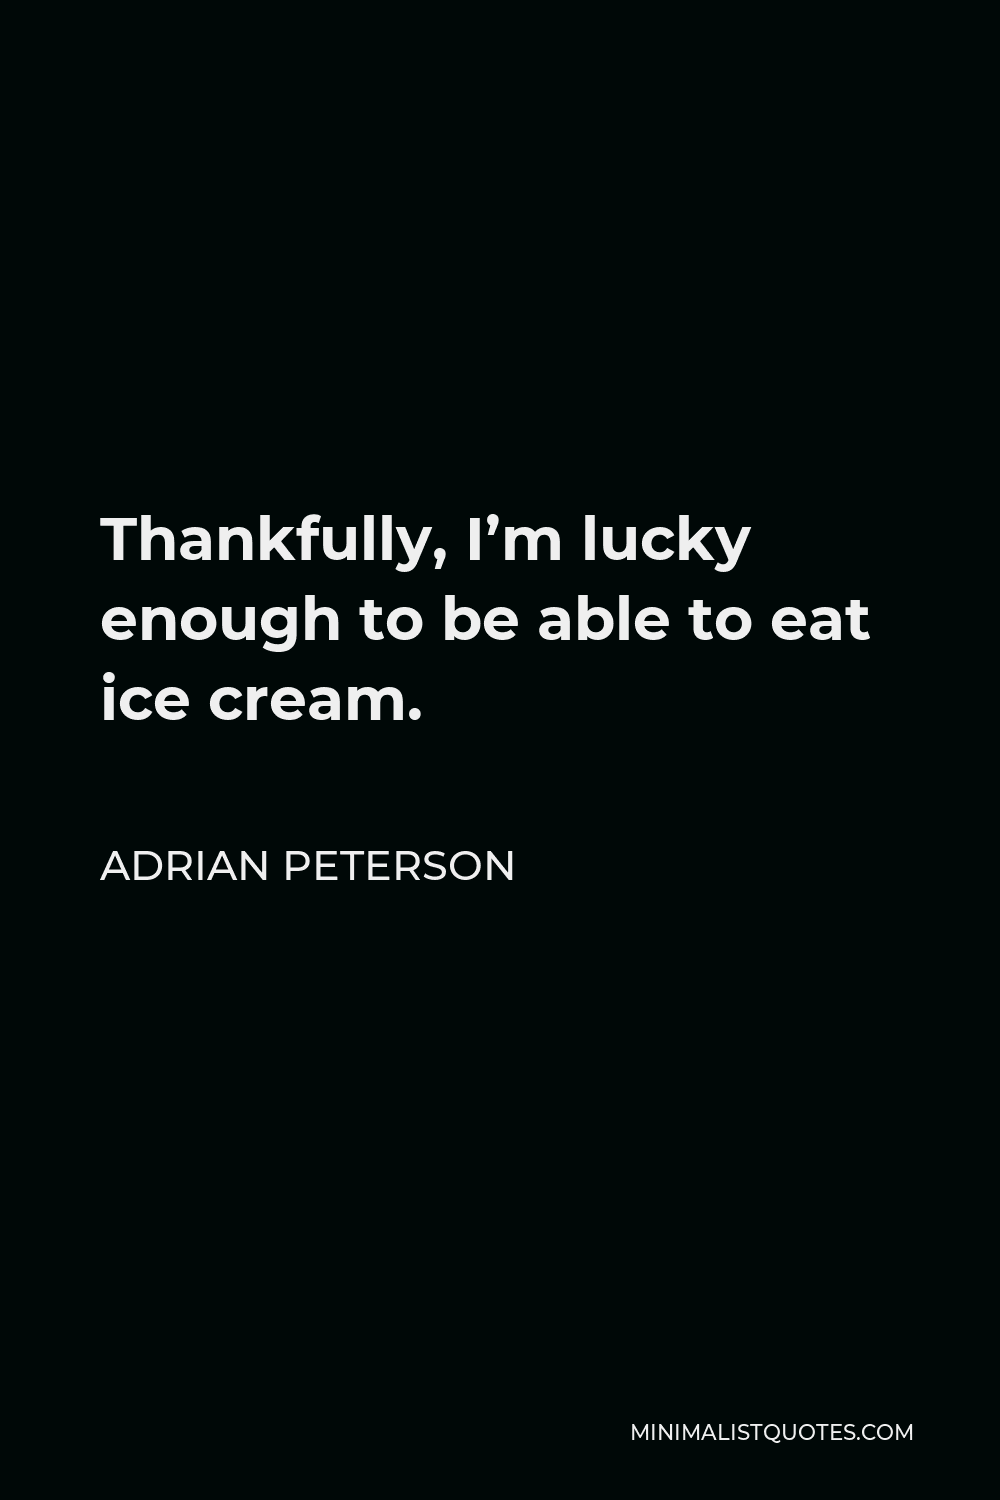 Adrian Peterson Quote - Thankfully, I’m lucky enough to be able to eat ice cream.